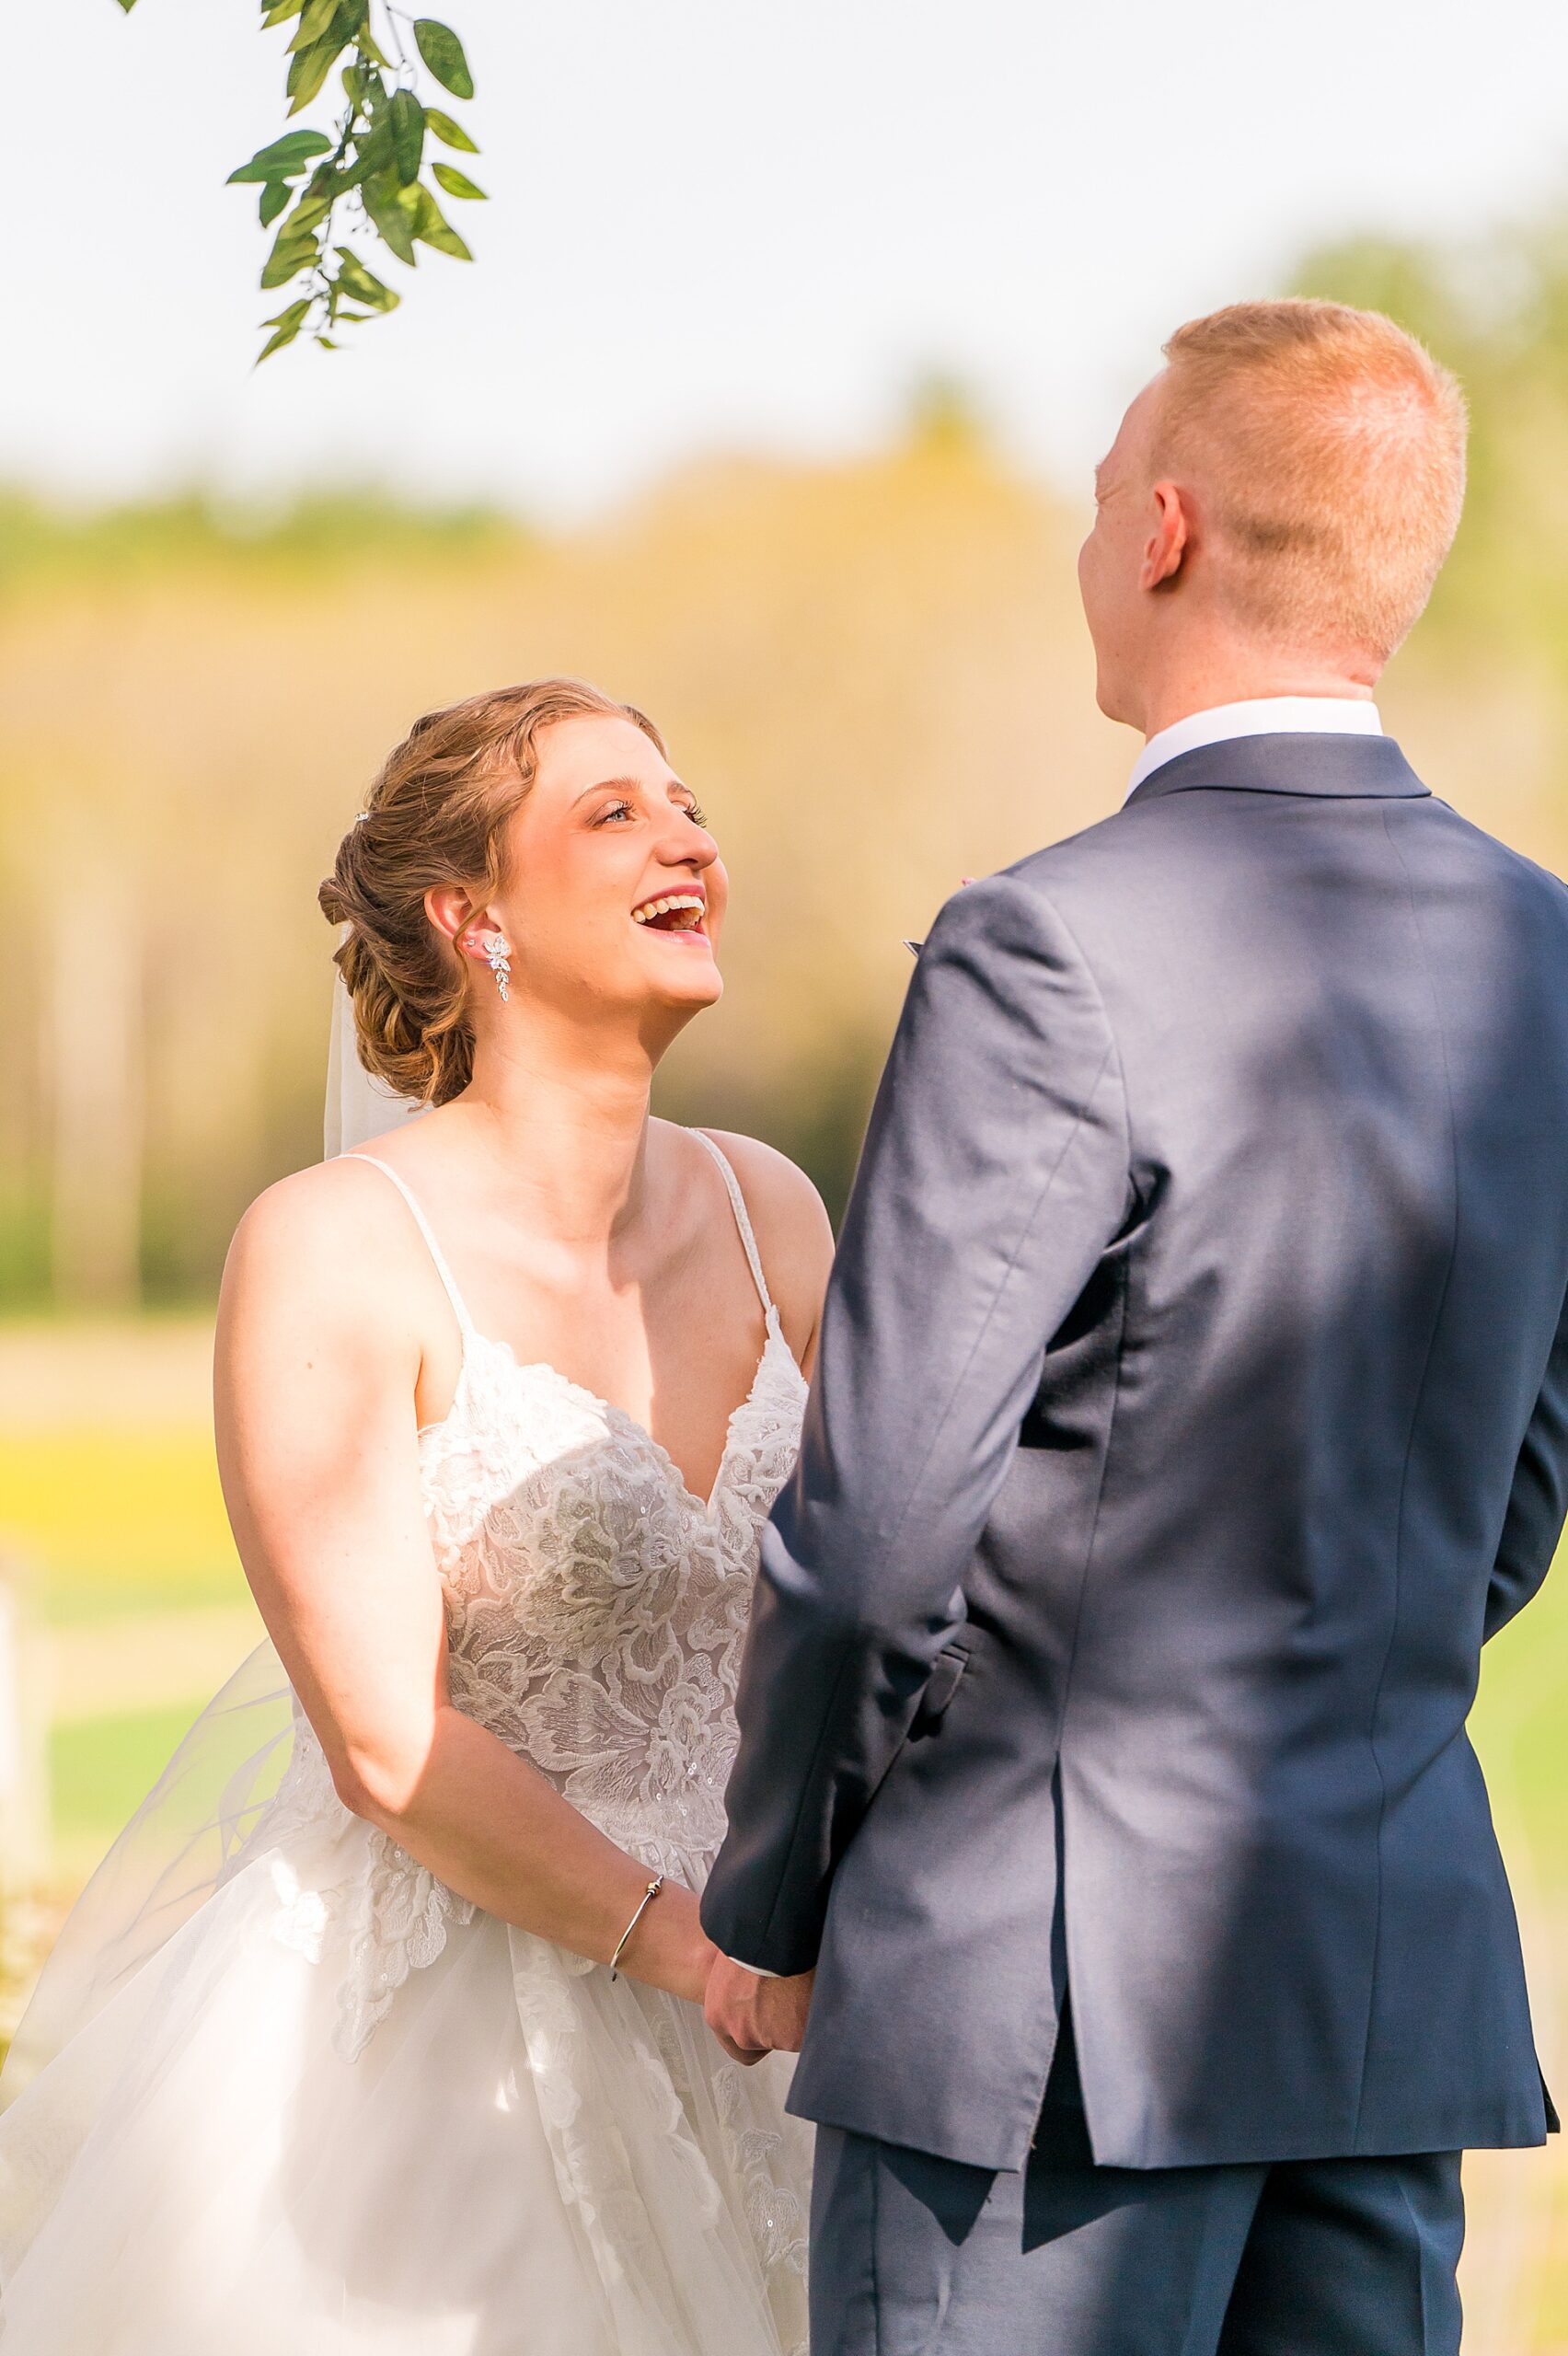 candid portrait of couple sharing intimate moment during first look